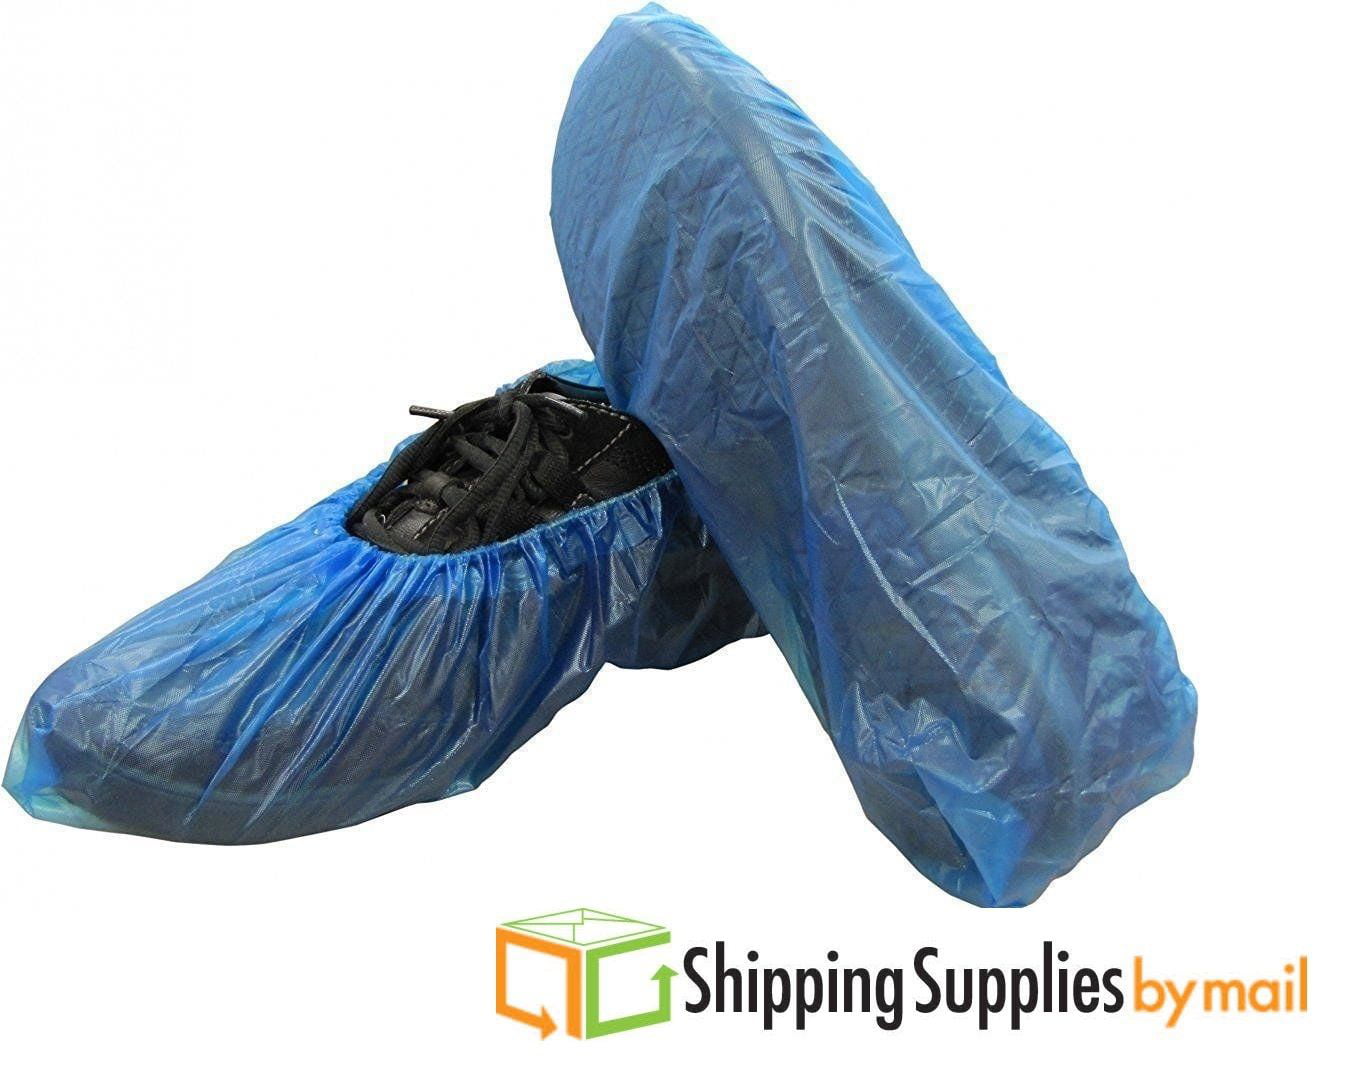 Shoe Covers Plastic Waterproof Disposable Blue Shoe Covers Overshoes Boot 300PCS